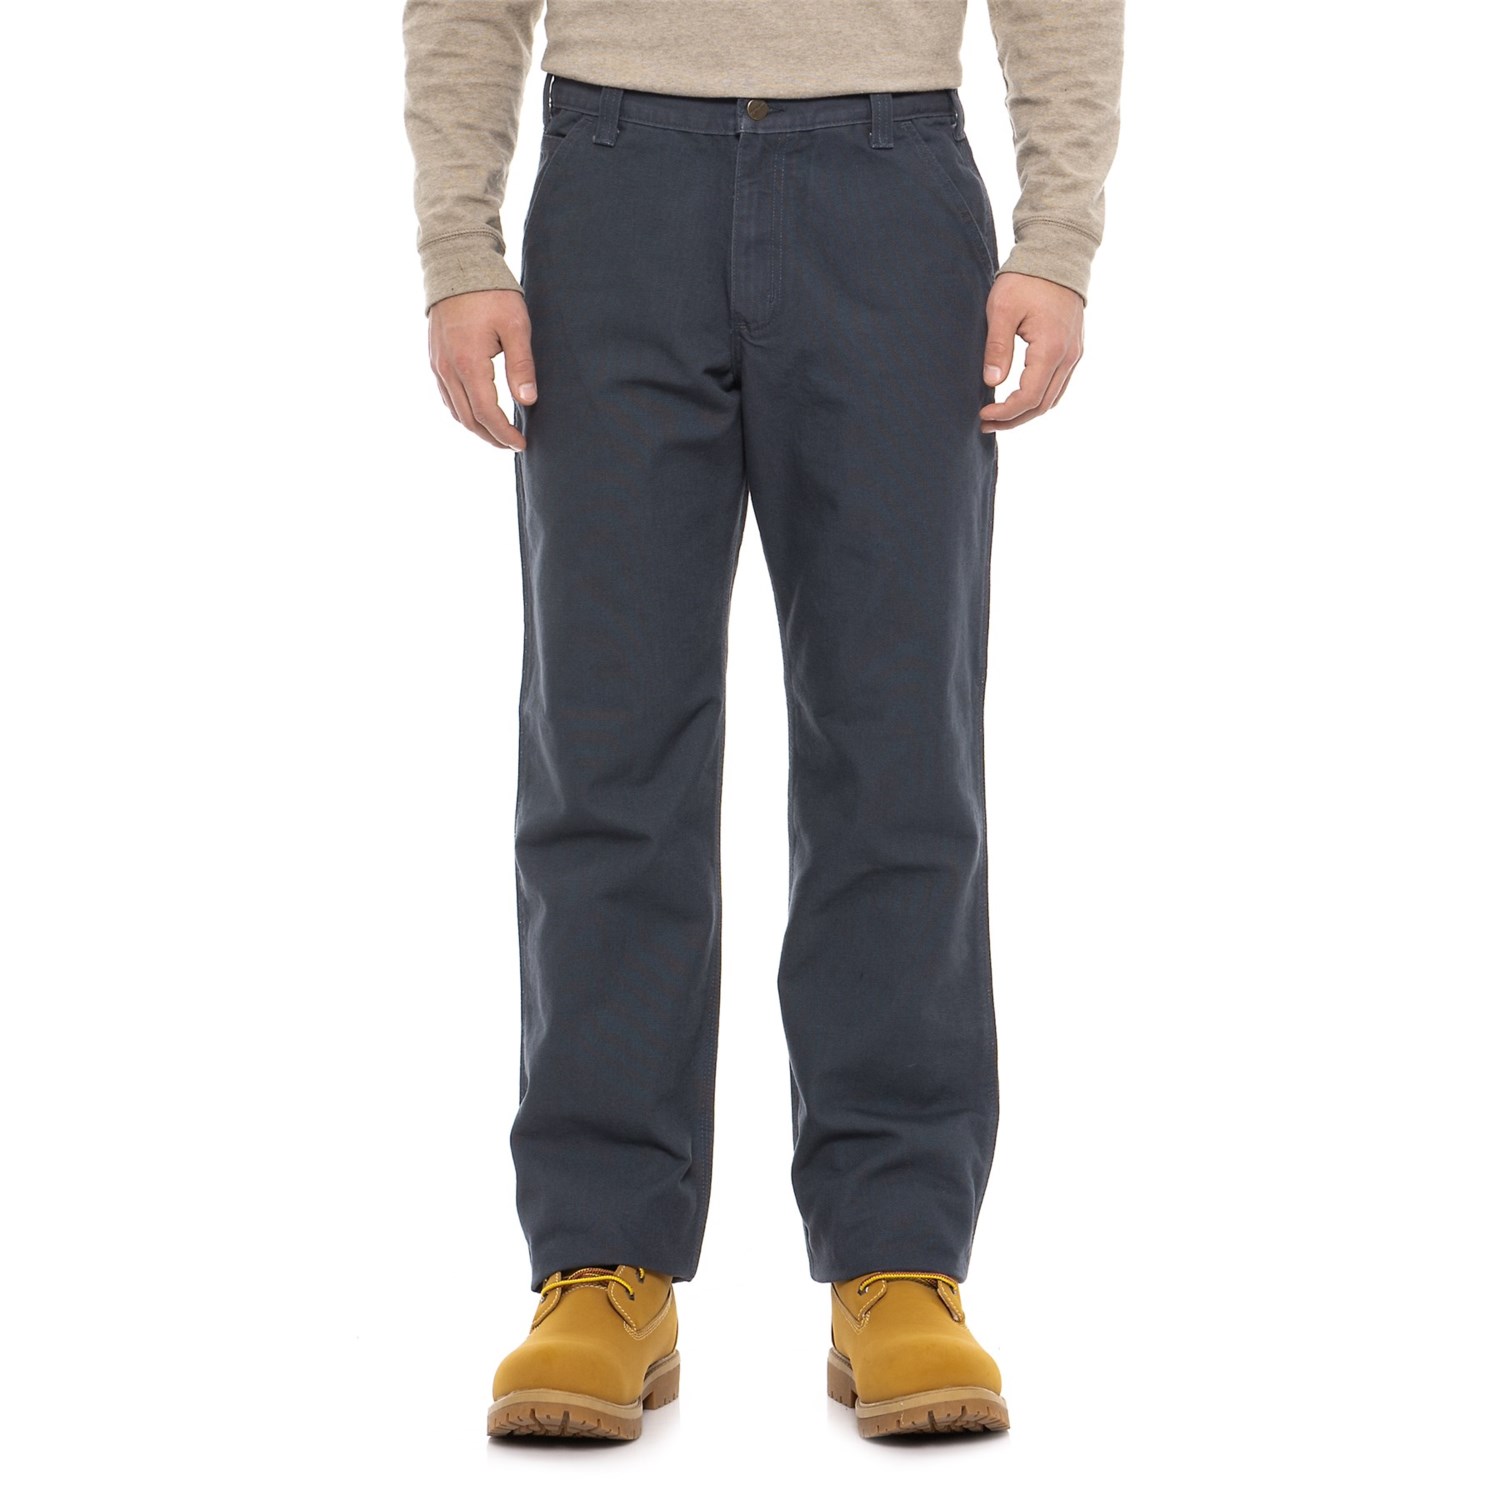 Carhartt Relaxed Fit Washed Duck Work Dungarees (For Men)